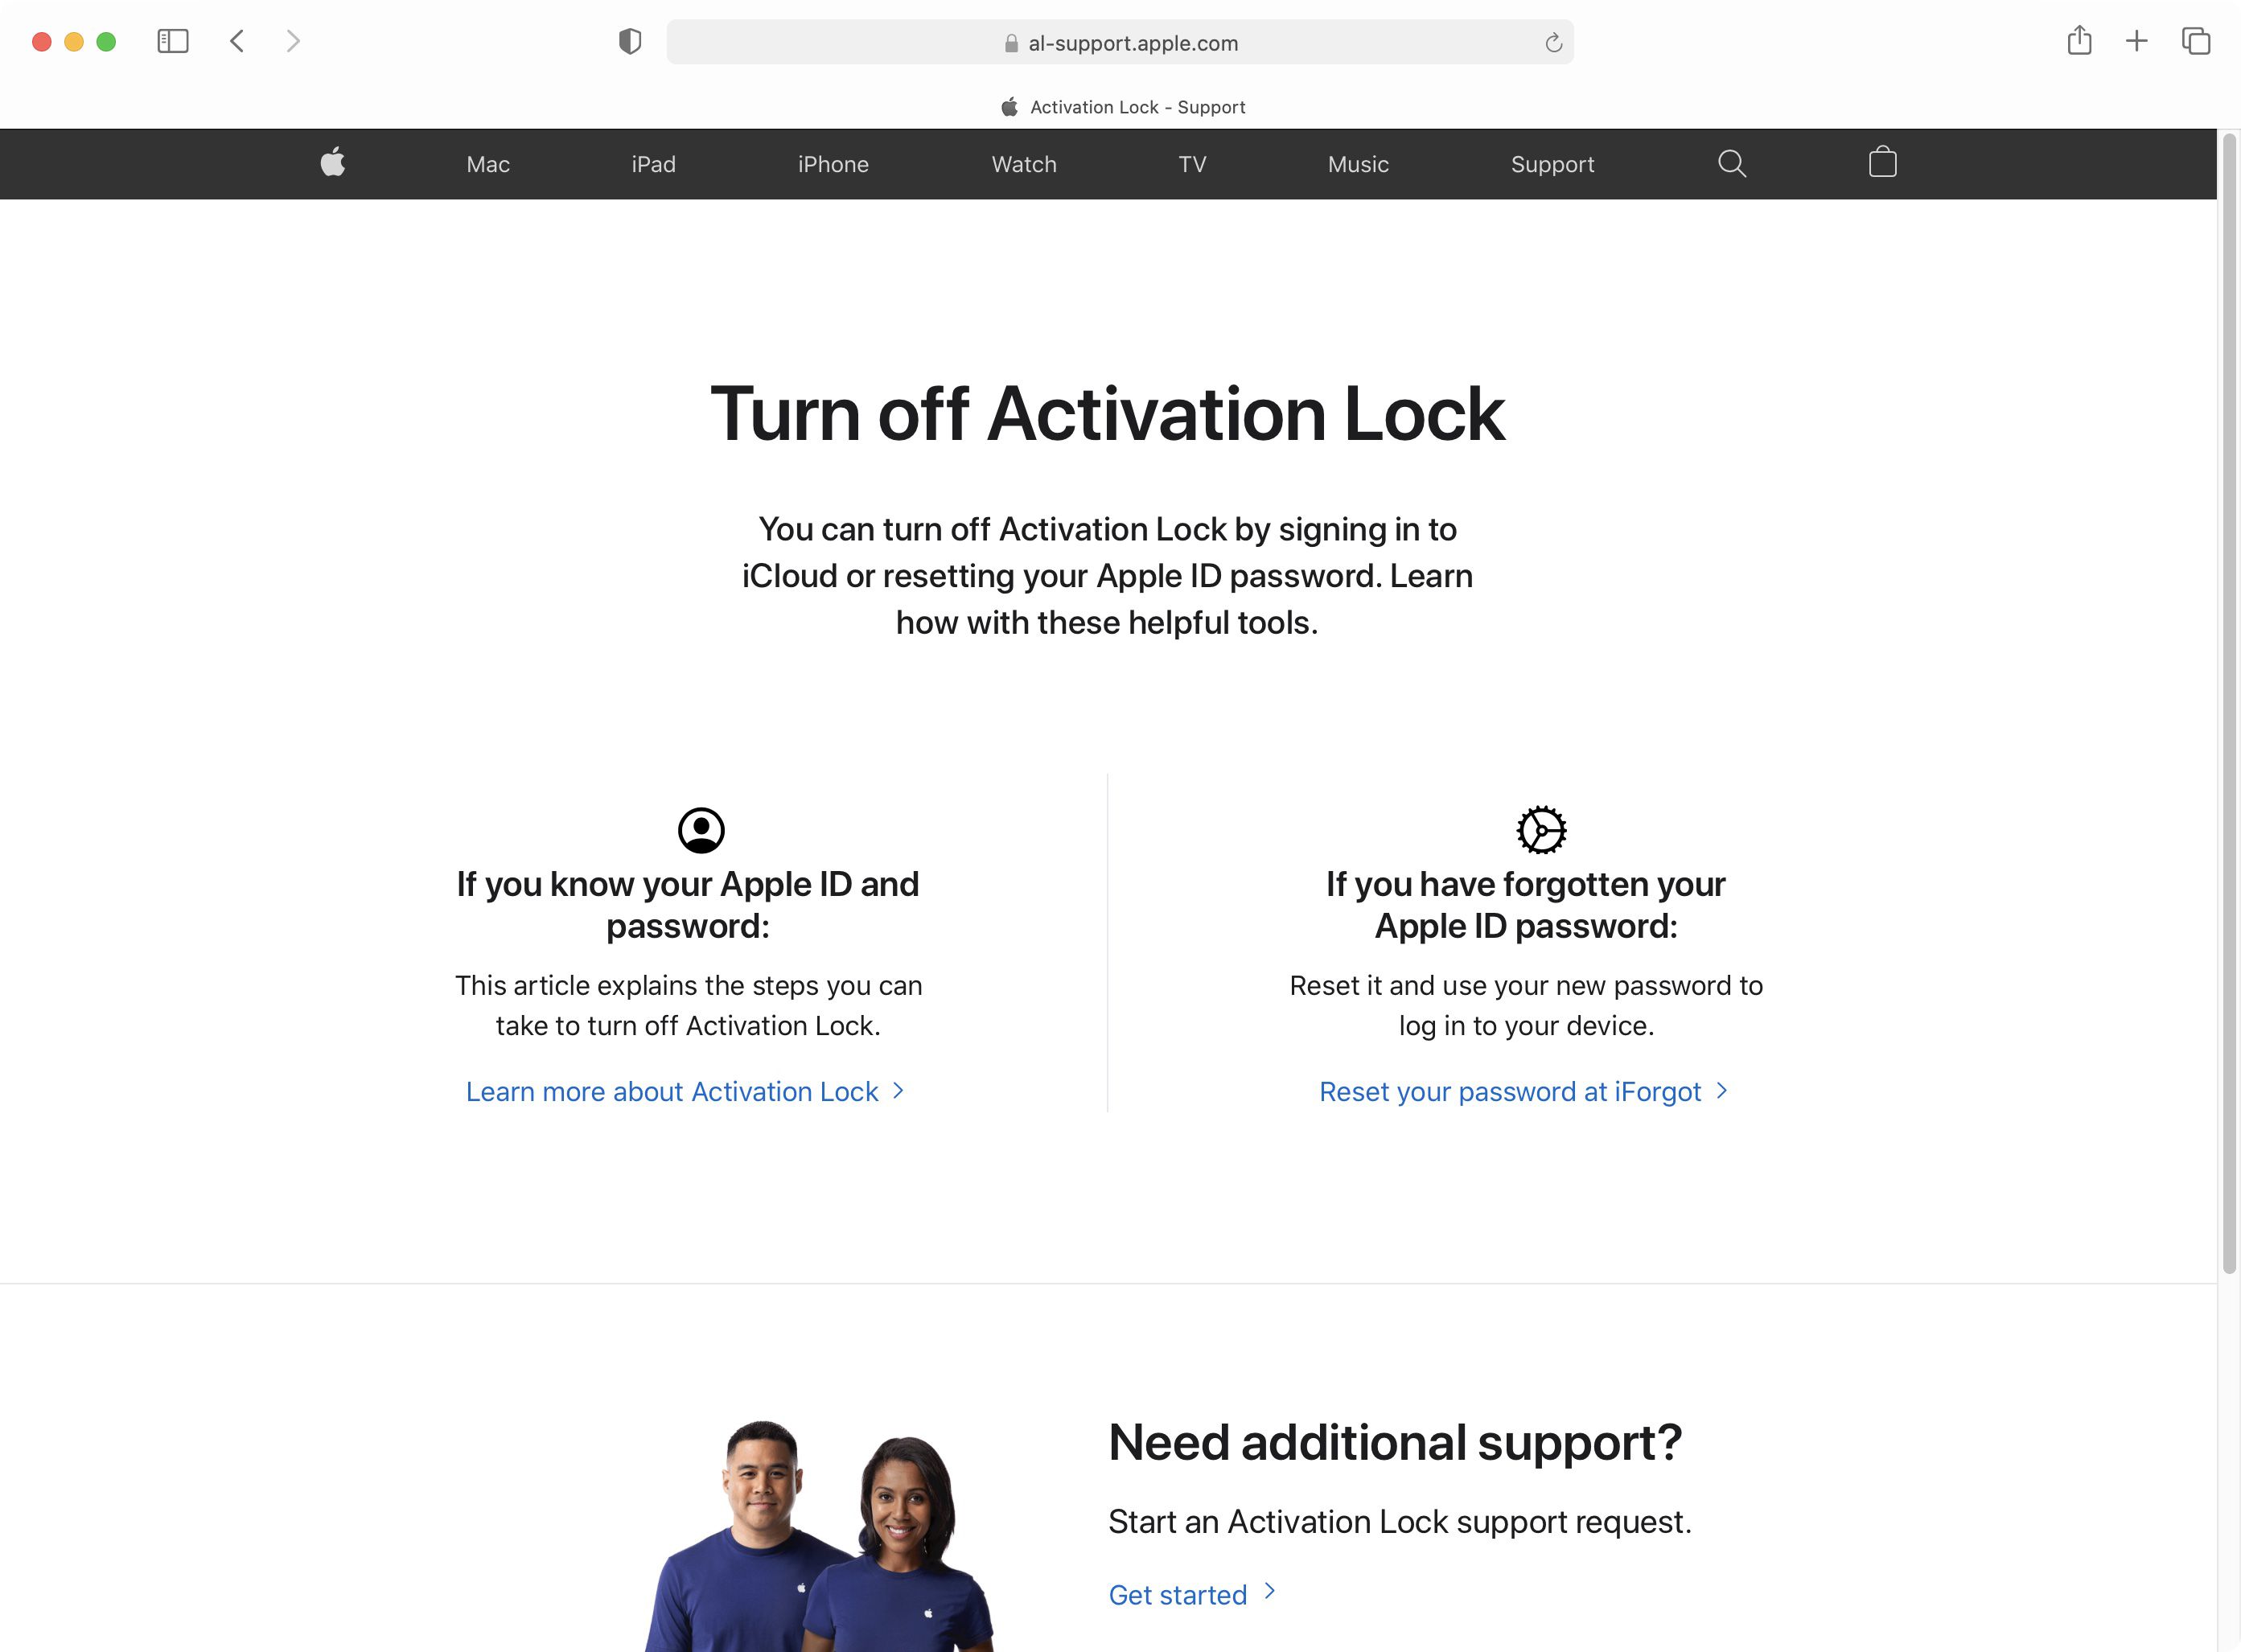 Apple launches self-service portal for initiating activation lock removal requests